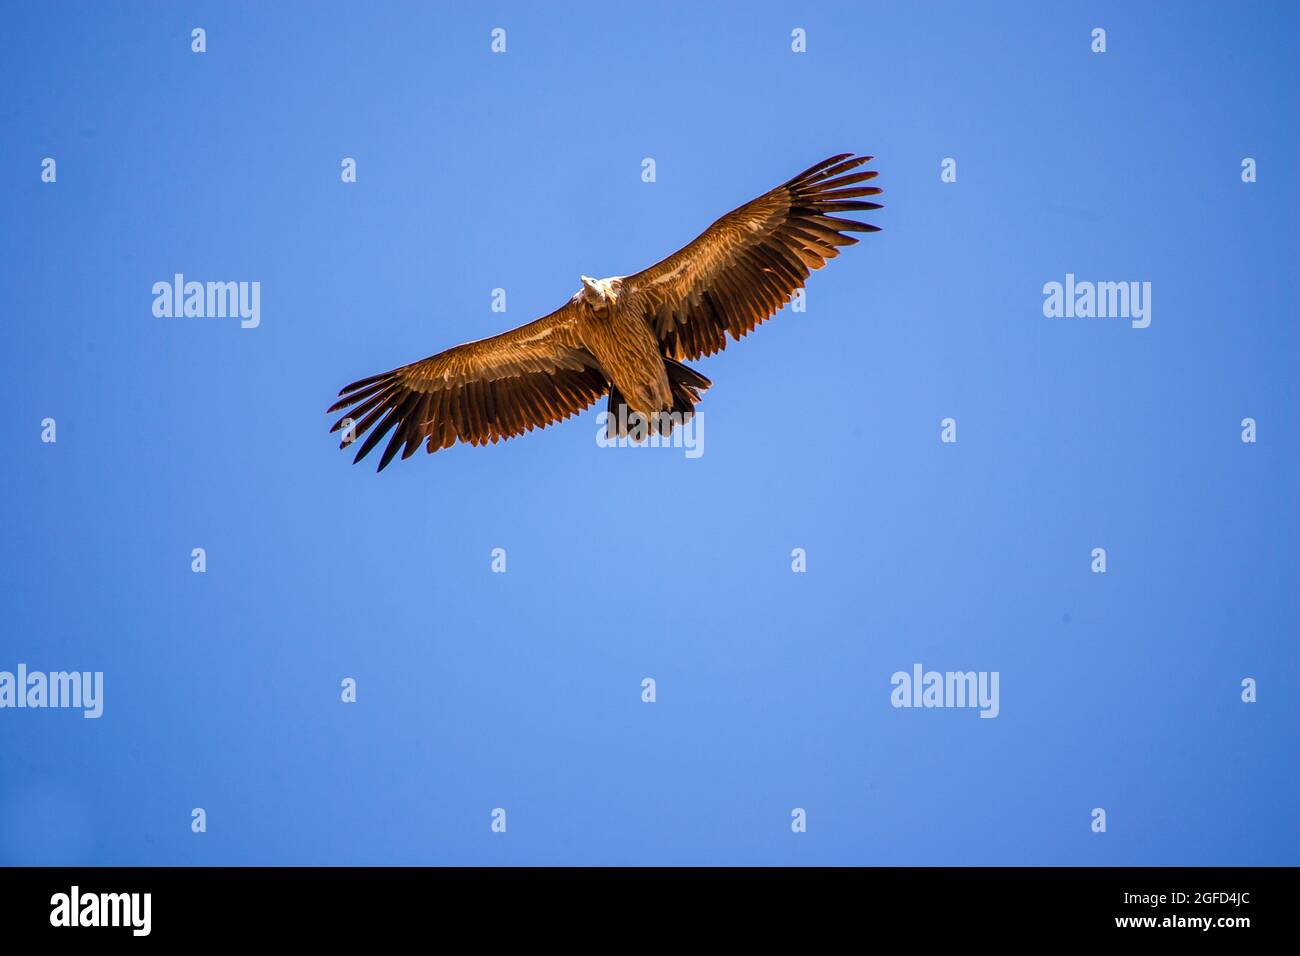 Himalayan griffon vulture (Gyps himalayensis). in flight with a blue sky background. The Himalayan vulture (Gyps himalayensis) or Himalayan griffon vu Stock Photo